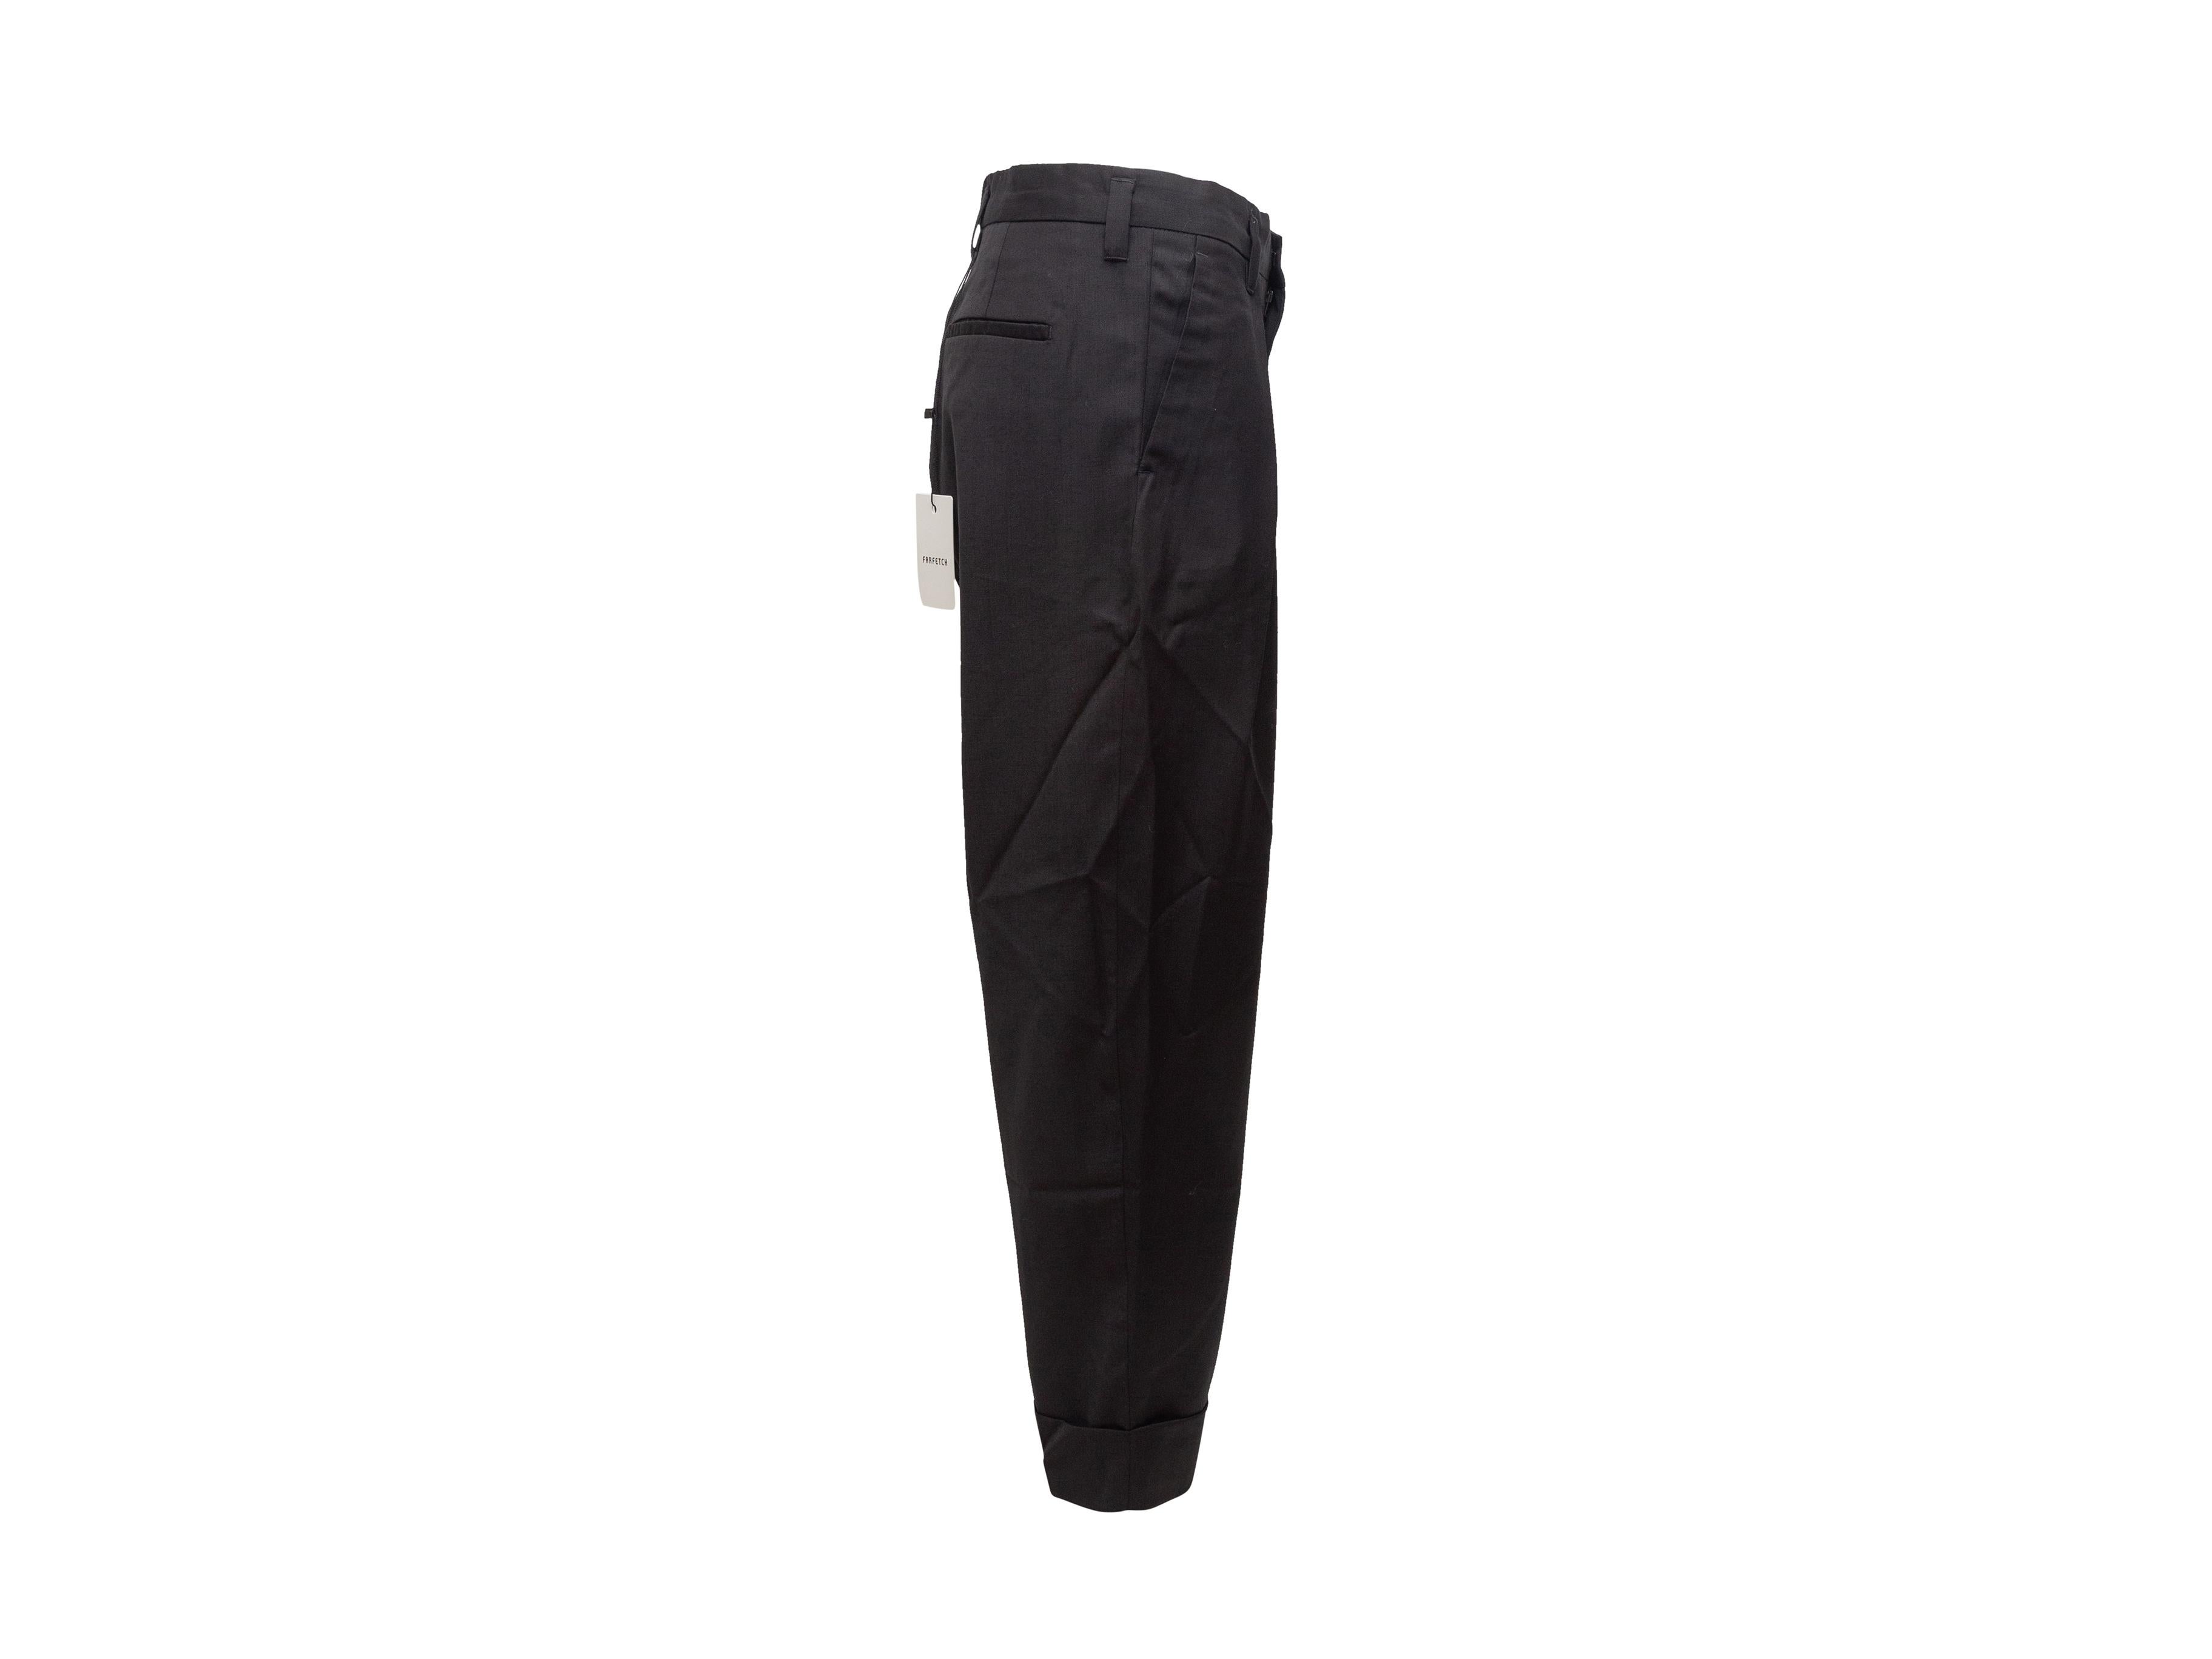 black pleated trousers